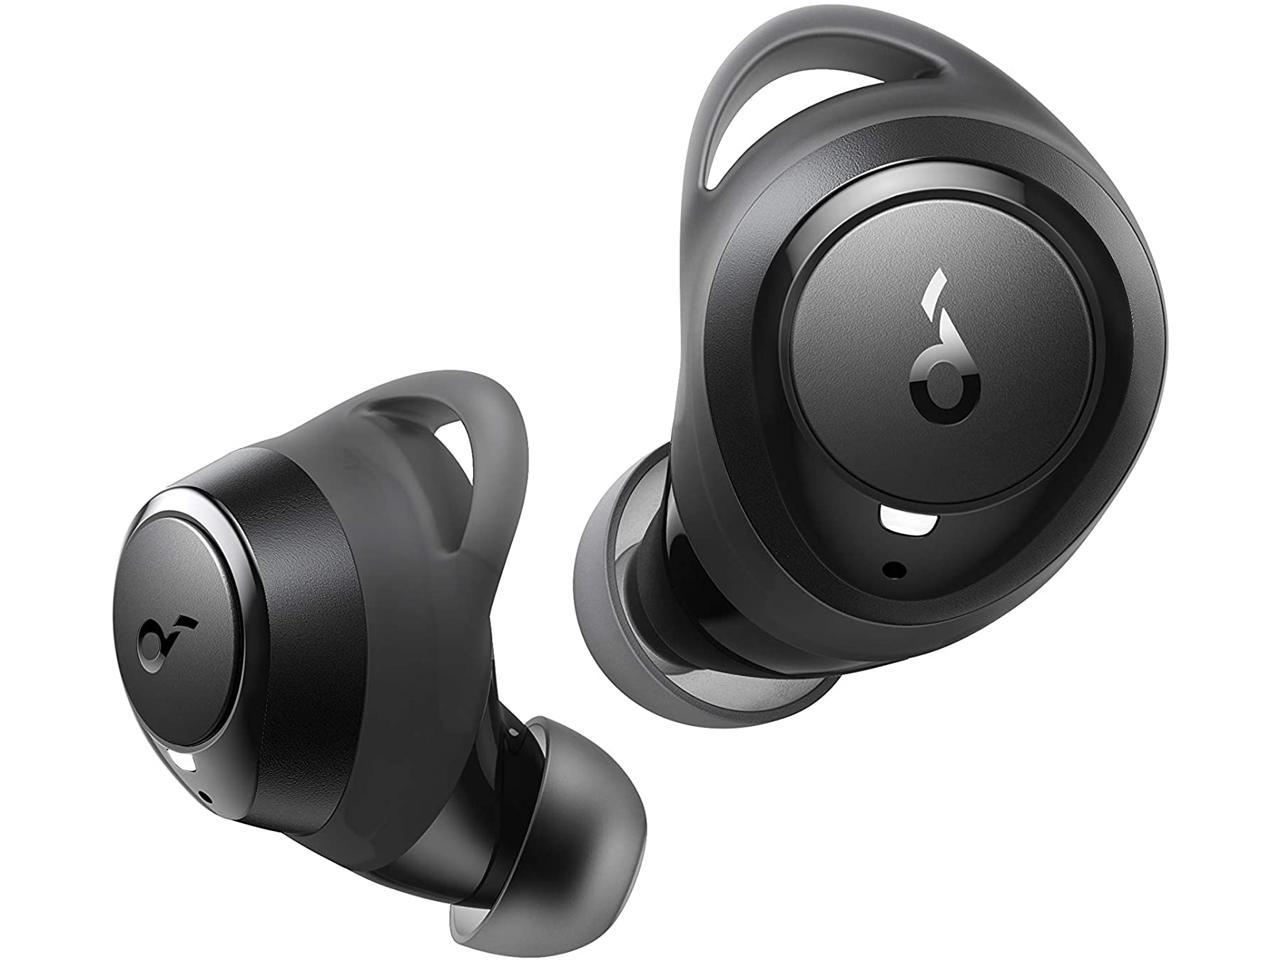 Anker Soundcore Life A1 True Wireless Earbuds $30 at Newegg